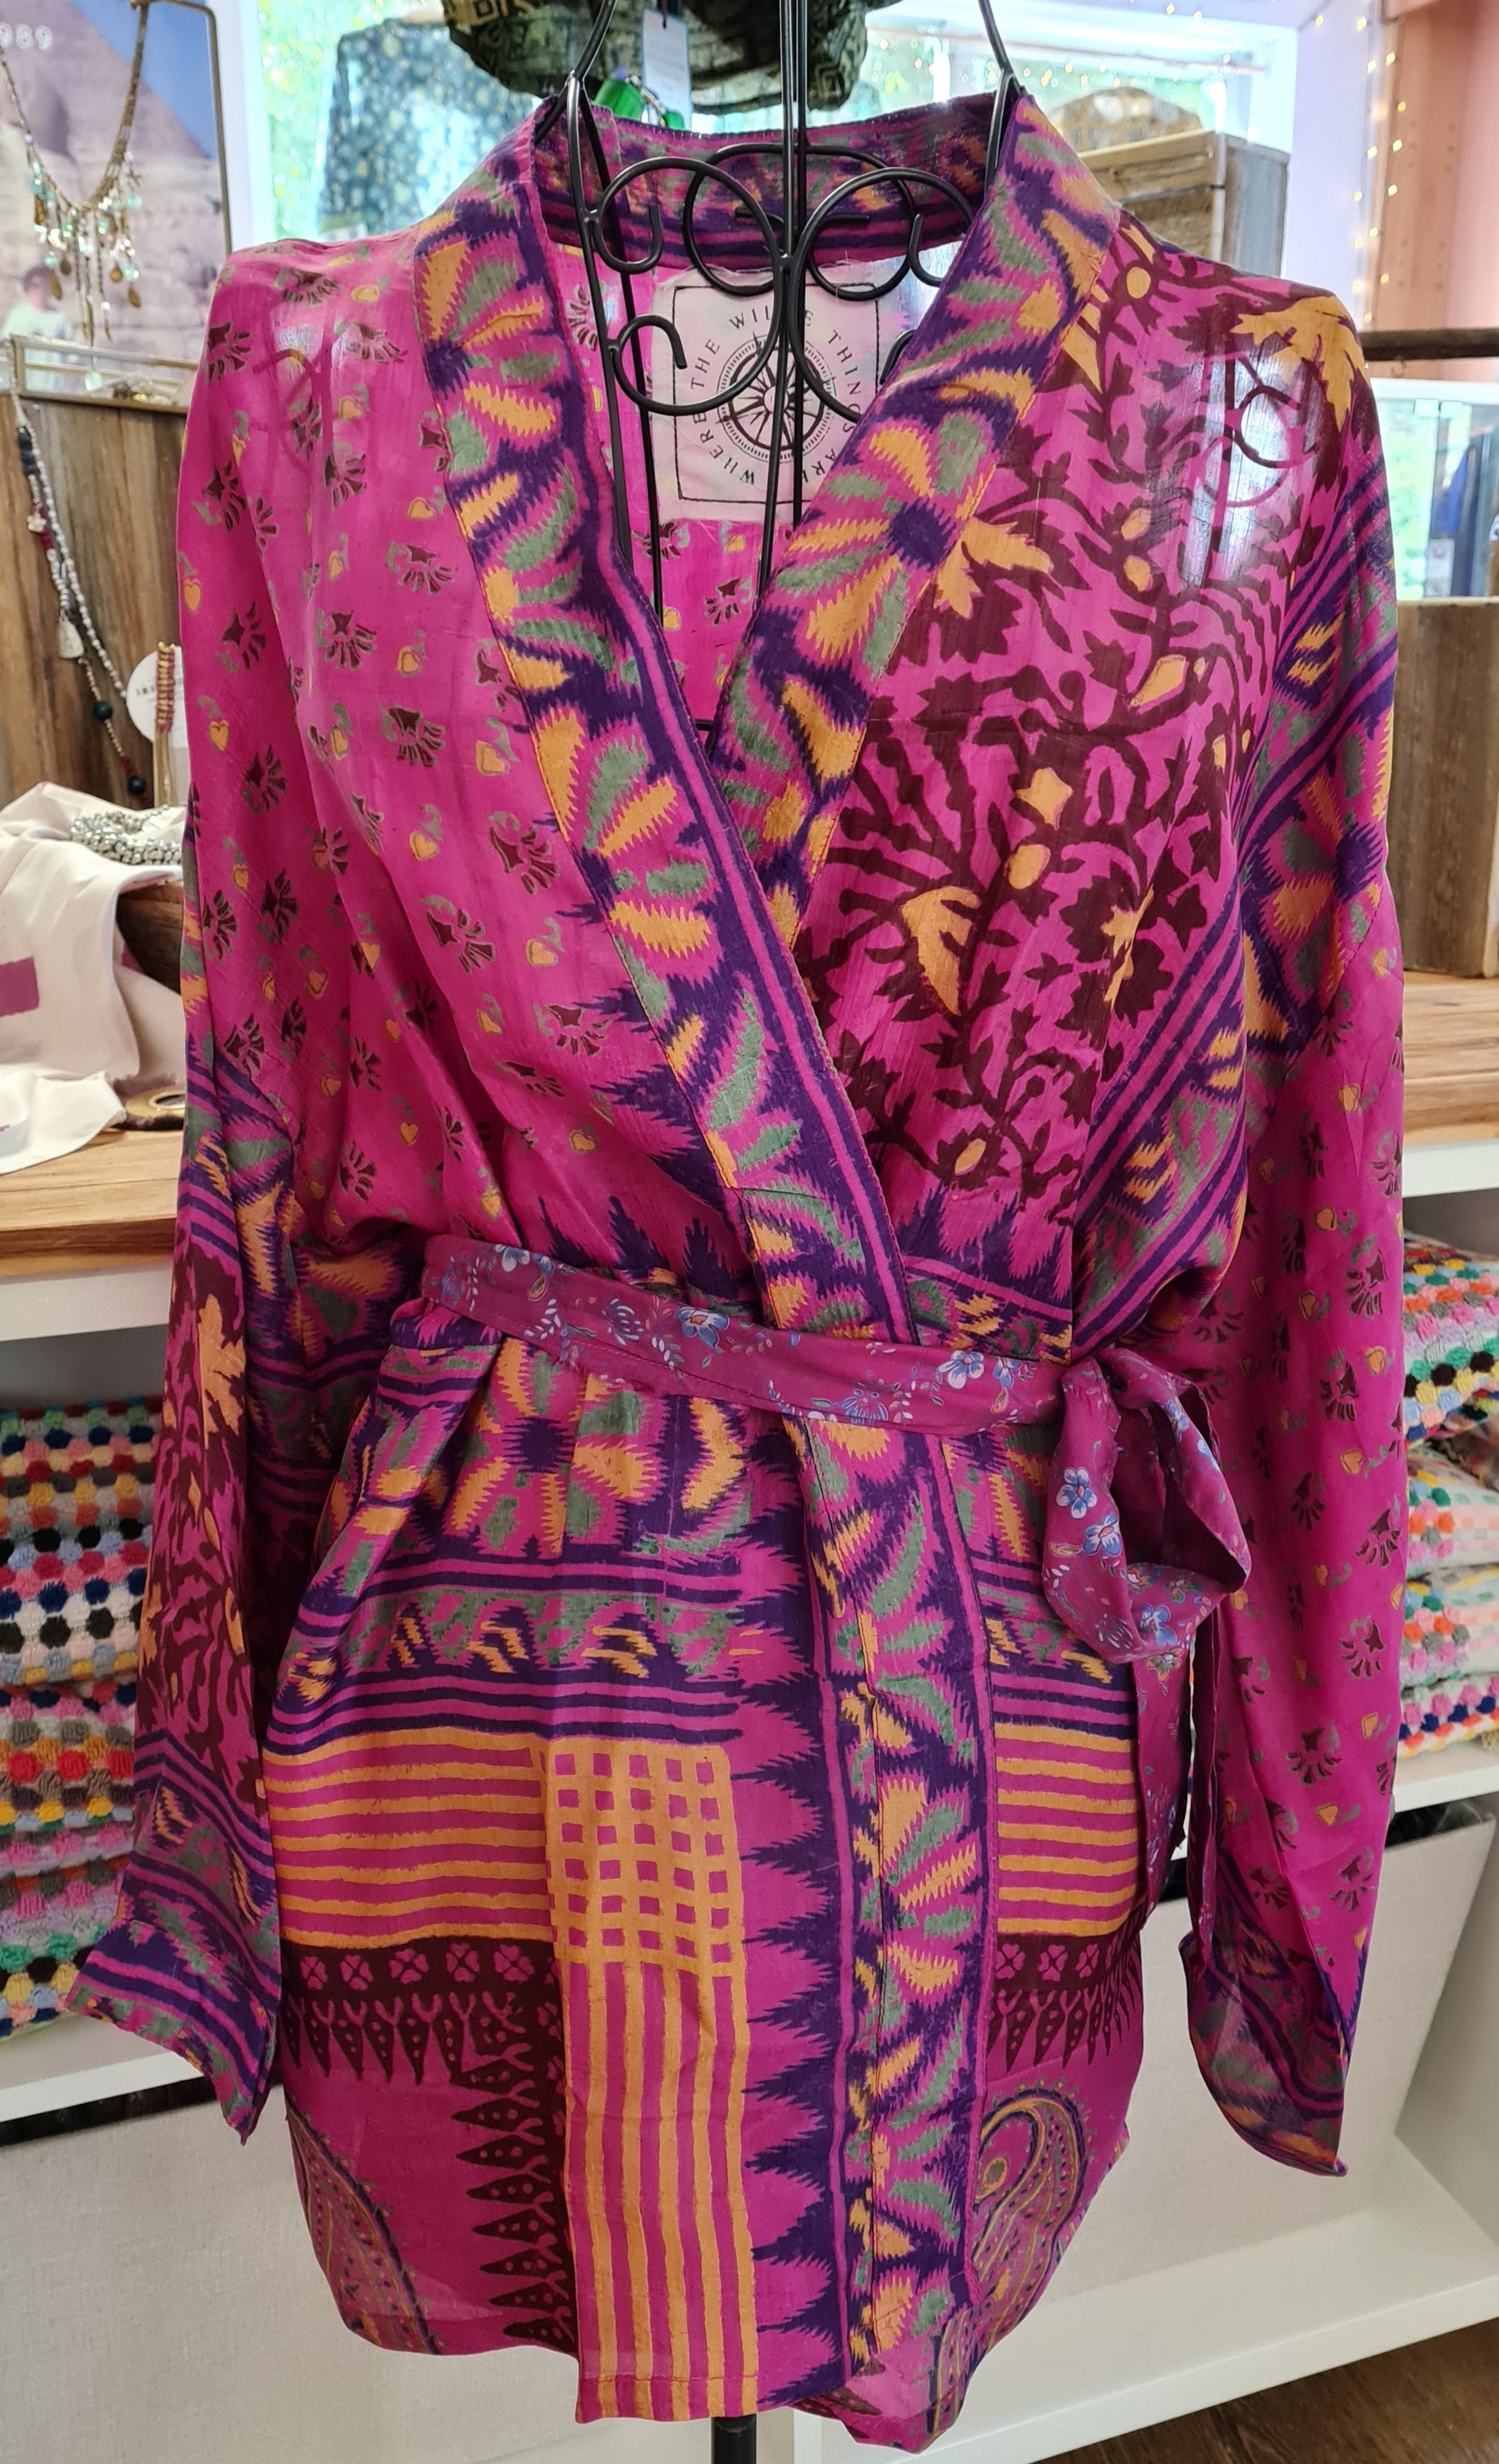 A vibrant pink kimono is displayed on a wire mannequin. The jacket has four panels of patterns, the top two are both a floral pattern, the left a simplistic and wide spread small flowers, the right shows a bold maroon and yellow winding vine floral pattern. The bottom panel is a various geometric and organic patterns in purple, yellow and a deeper pink. The fourth panel lines the sleeves and front of the jacket, a bold chunky geometric flower pattern.